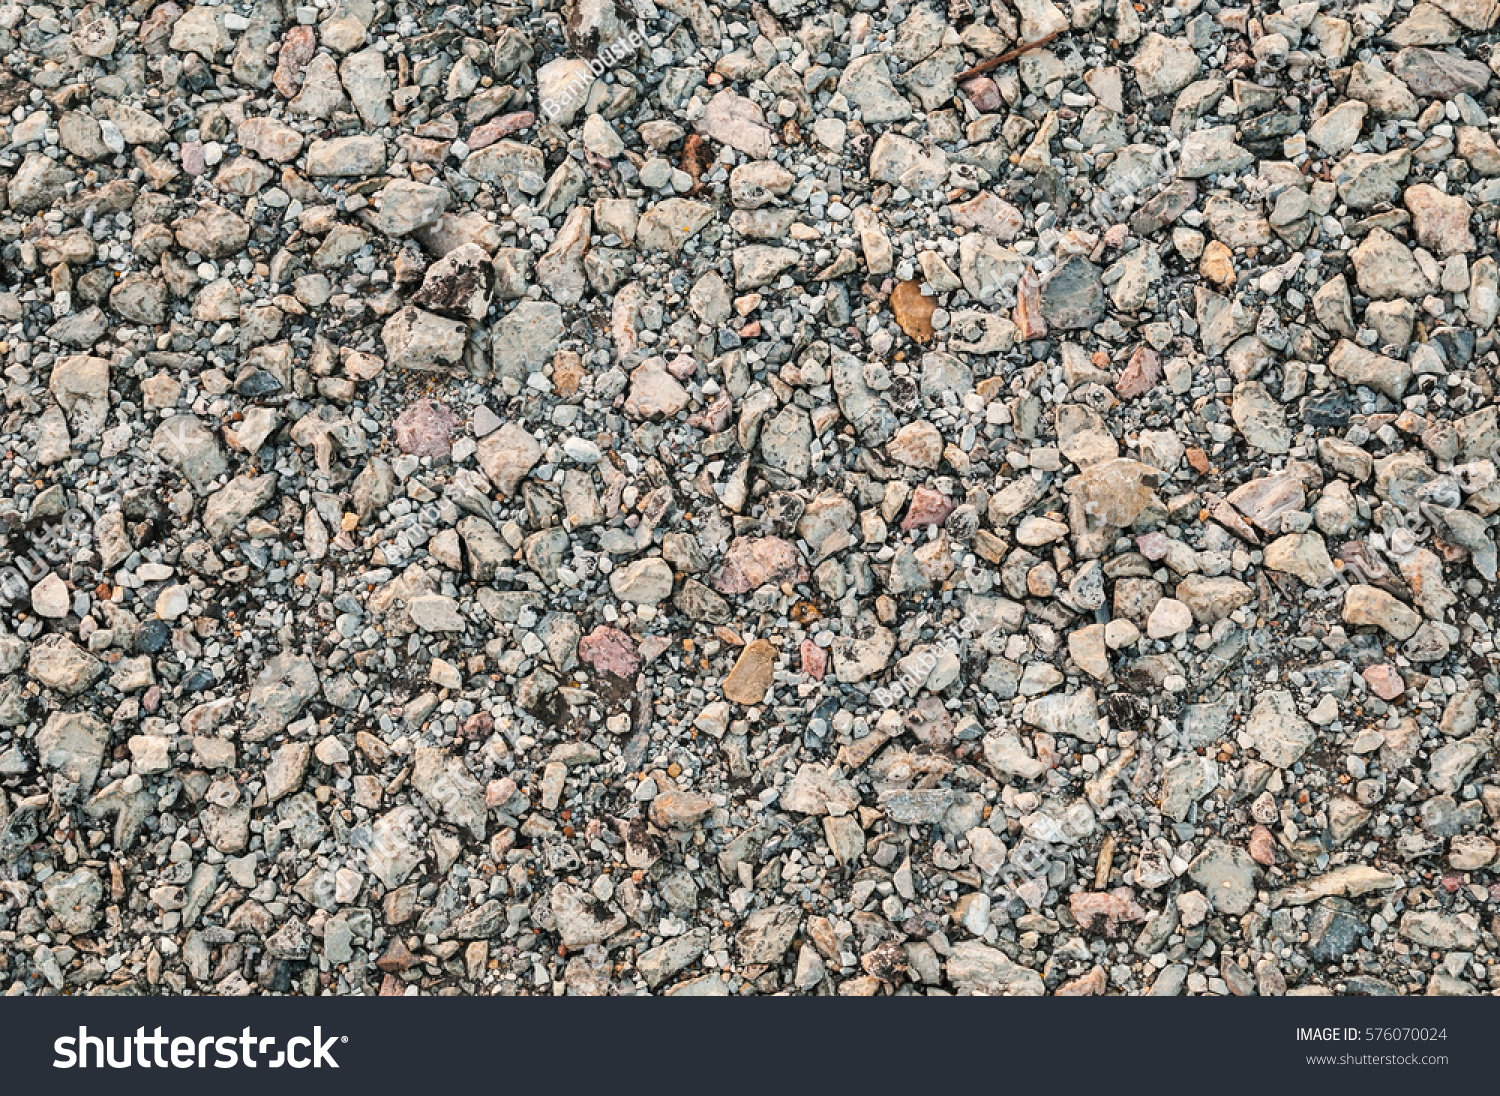 Crushed stones and grids background for presentation #576070024